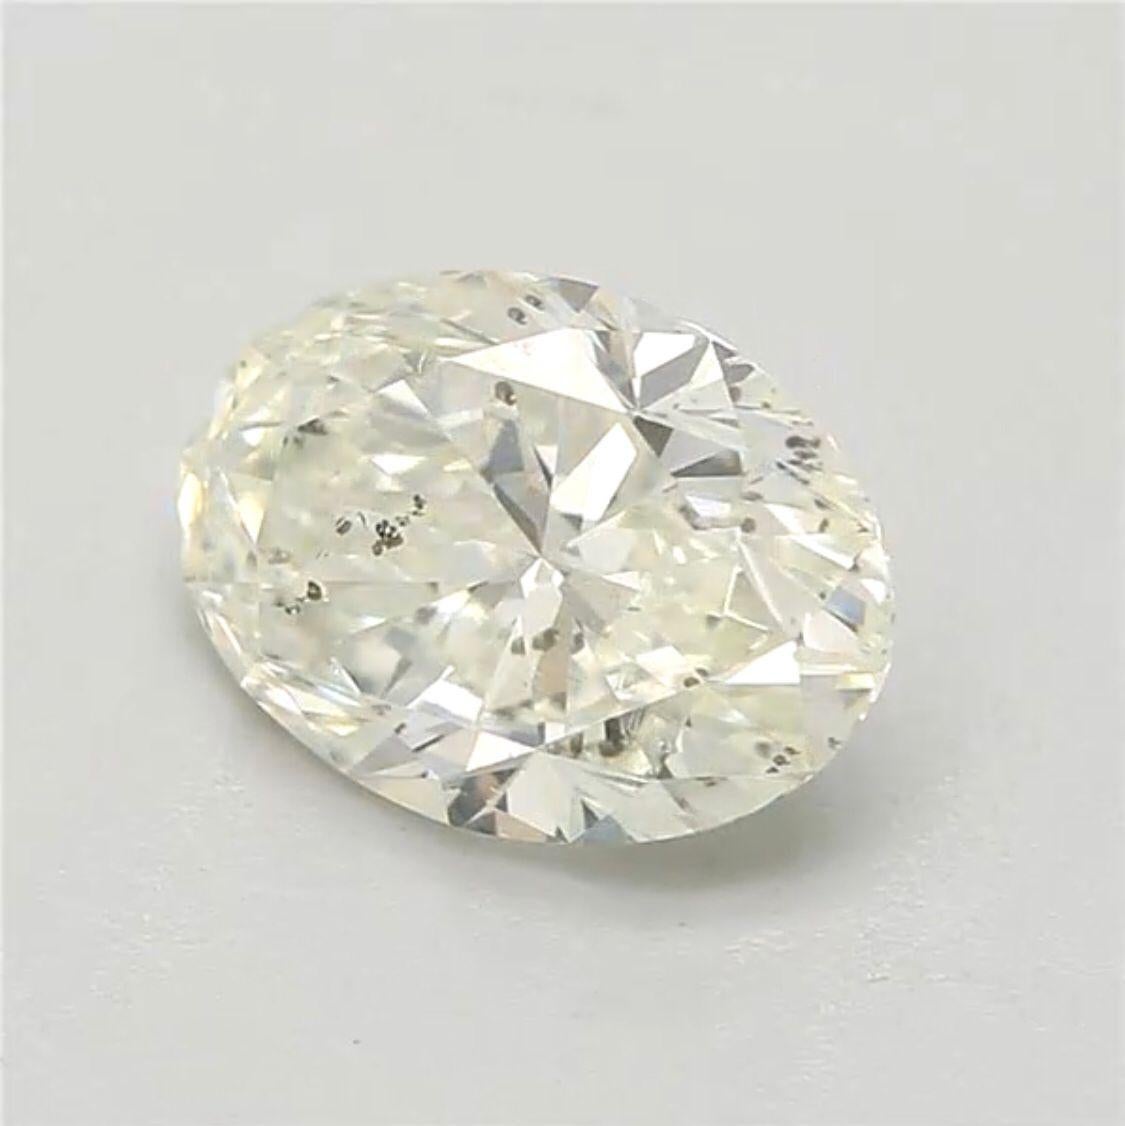 0.81 Carat Very Light Yellow Green Oval cut diamond SI2 Clarity GIA Certified For Sale 2